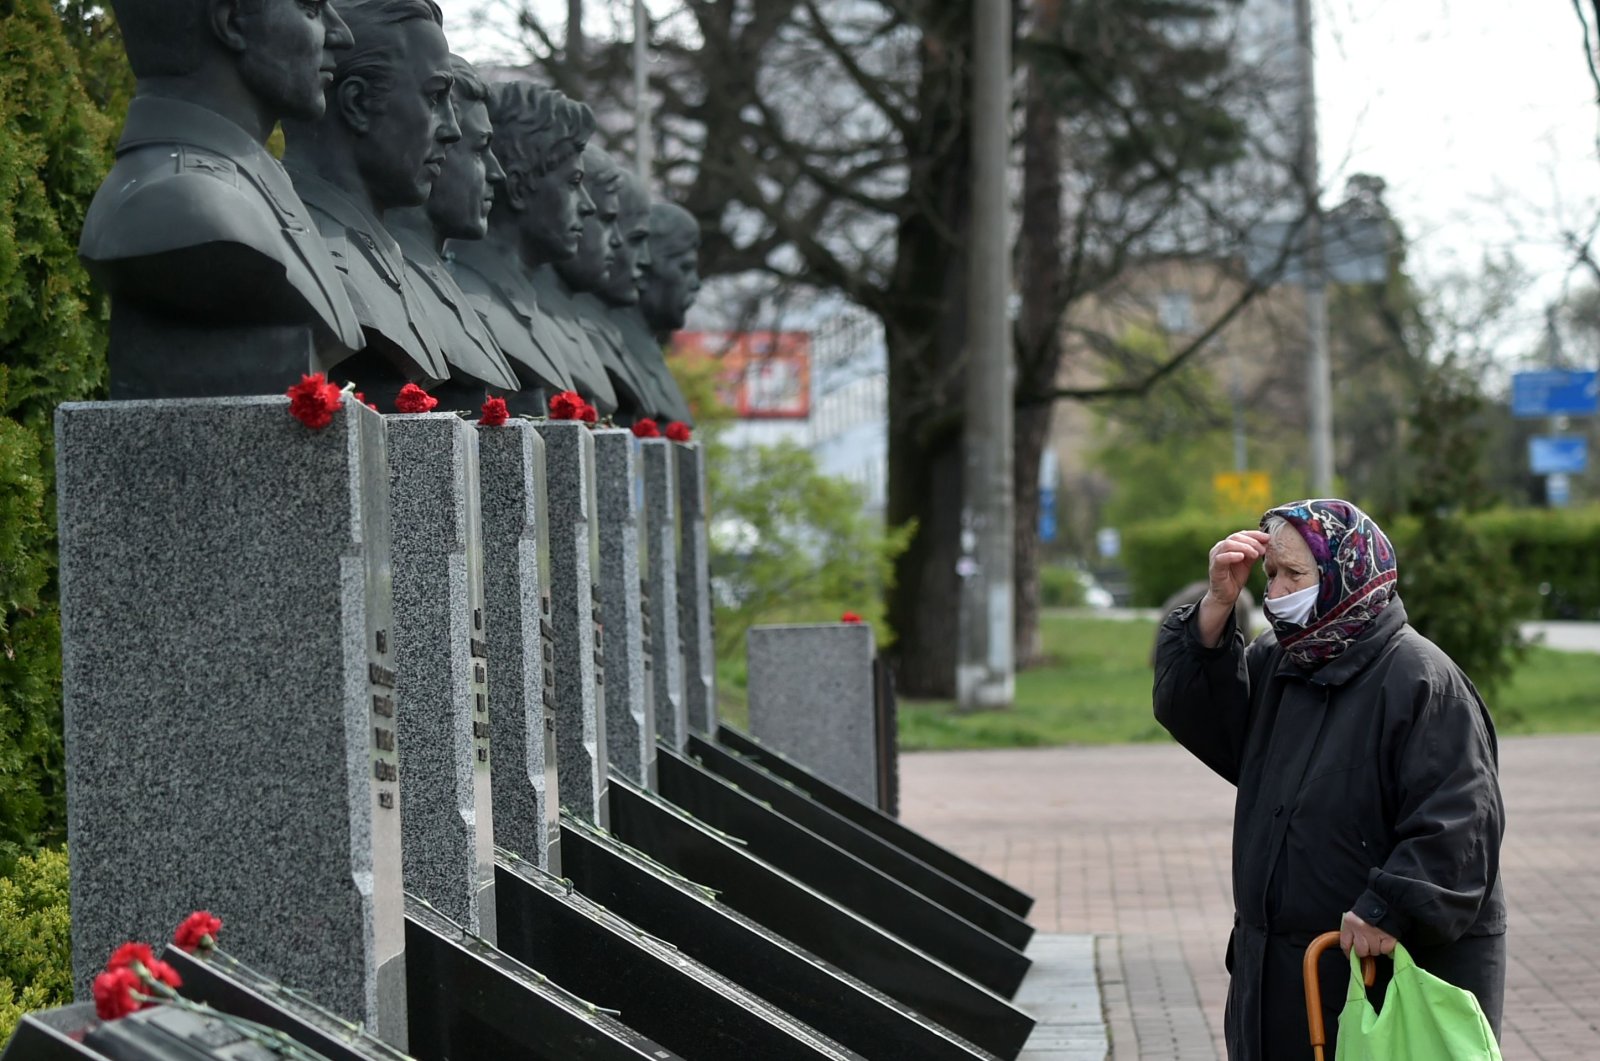 An elderly woman wearing a face mask crosses herself as she visits Chernobyl's memorial in Kiev to commemorate the victims on the 34th anniversary of the tragedy on April 26, 2020, amid the COVID-19 coronavirus pandemic. (AFP Photo) 